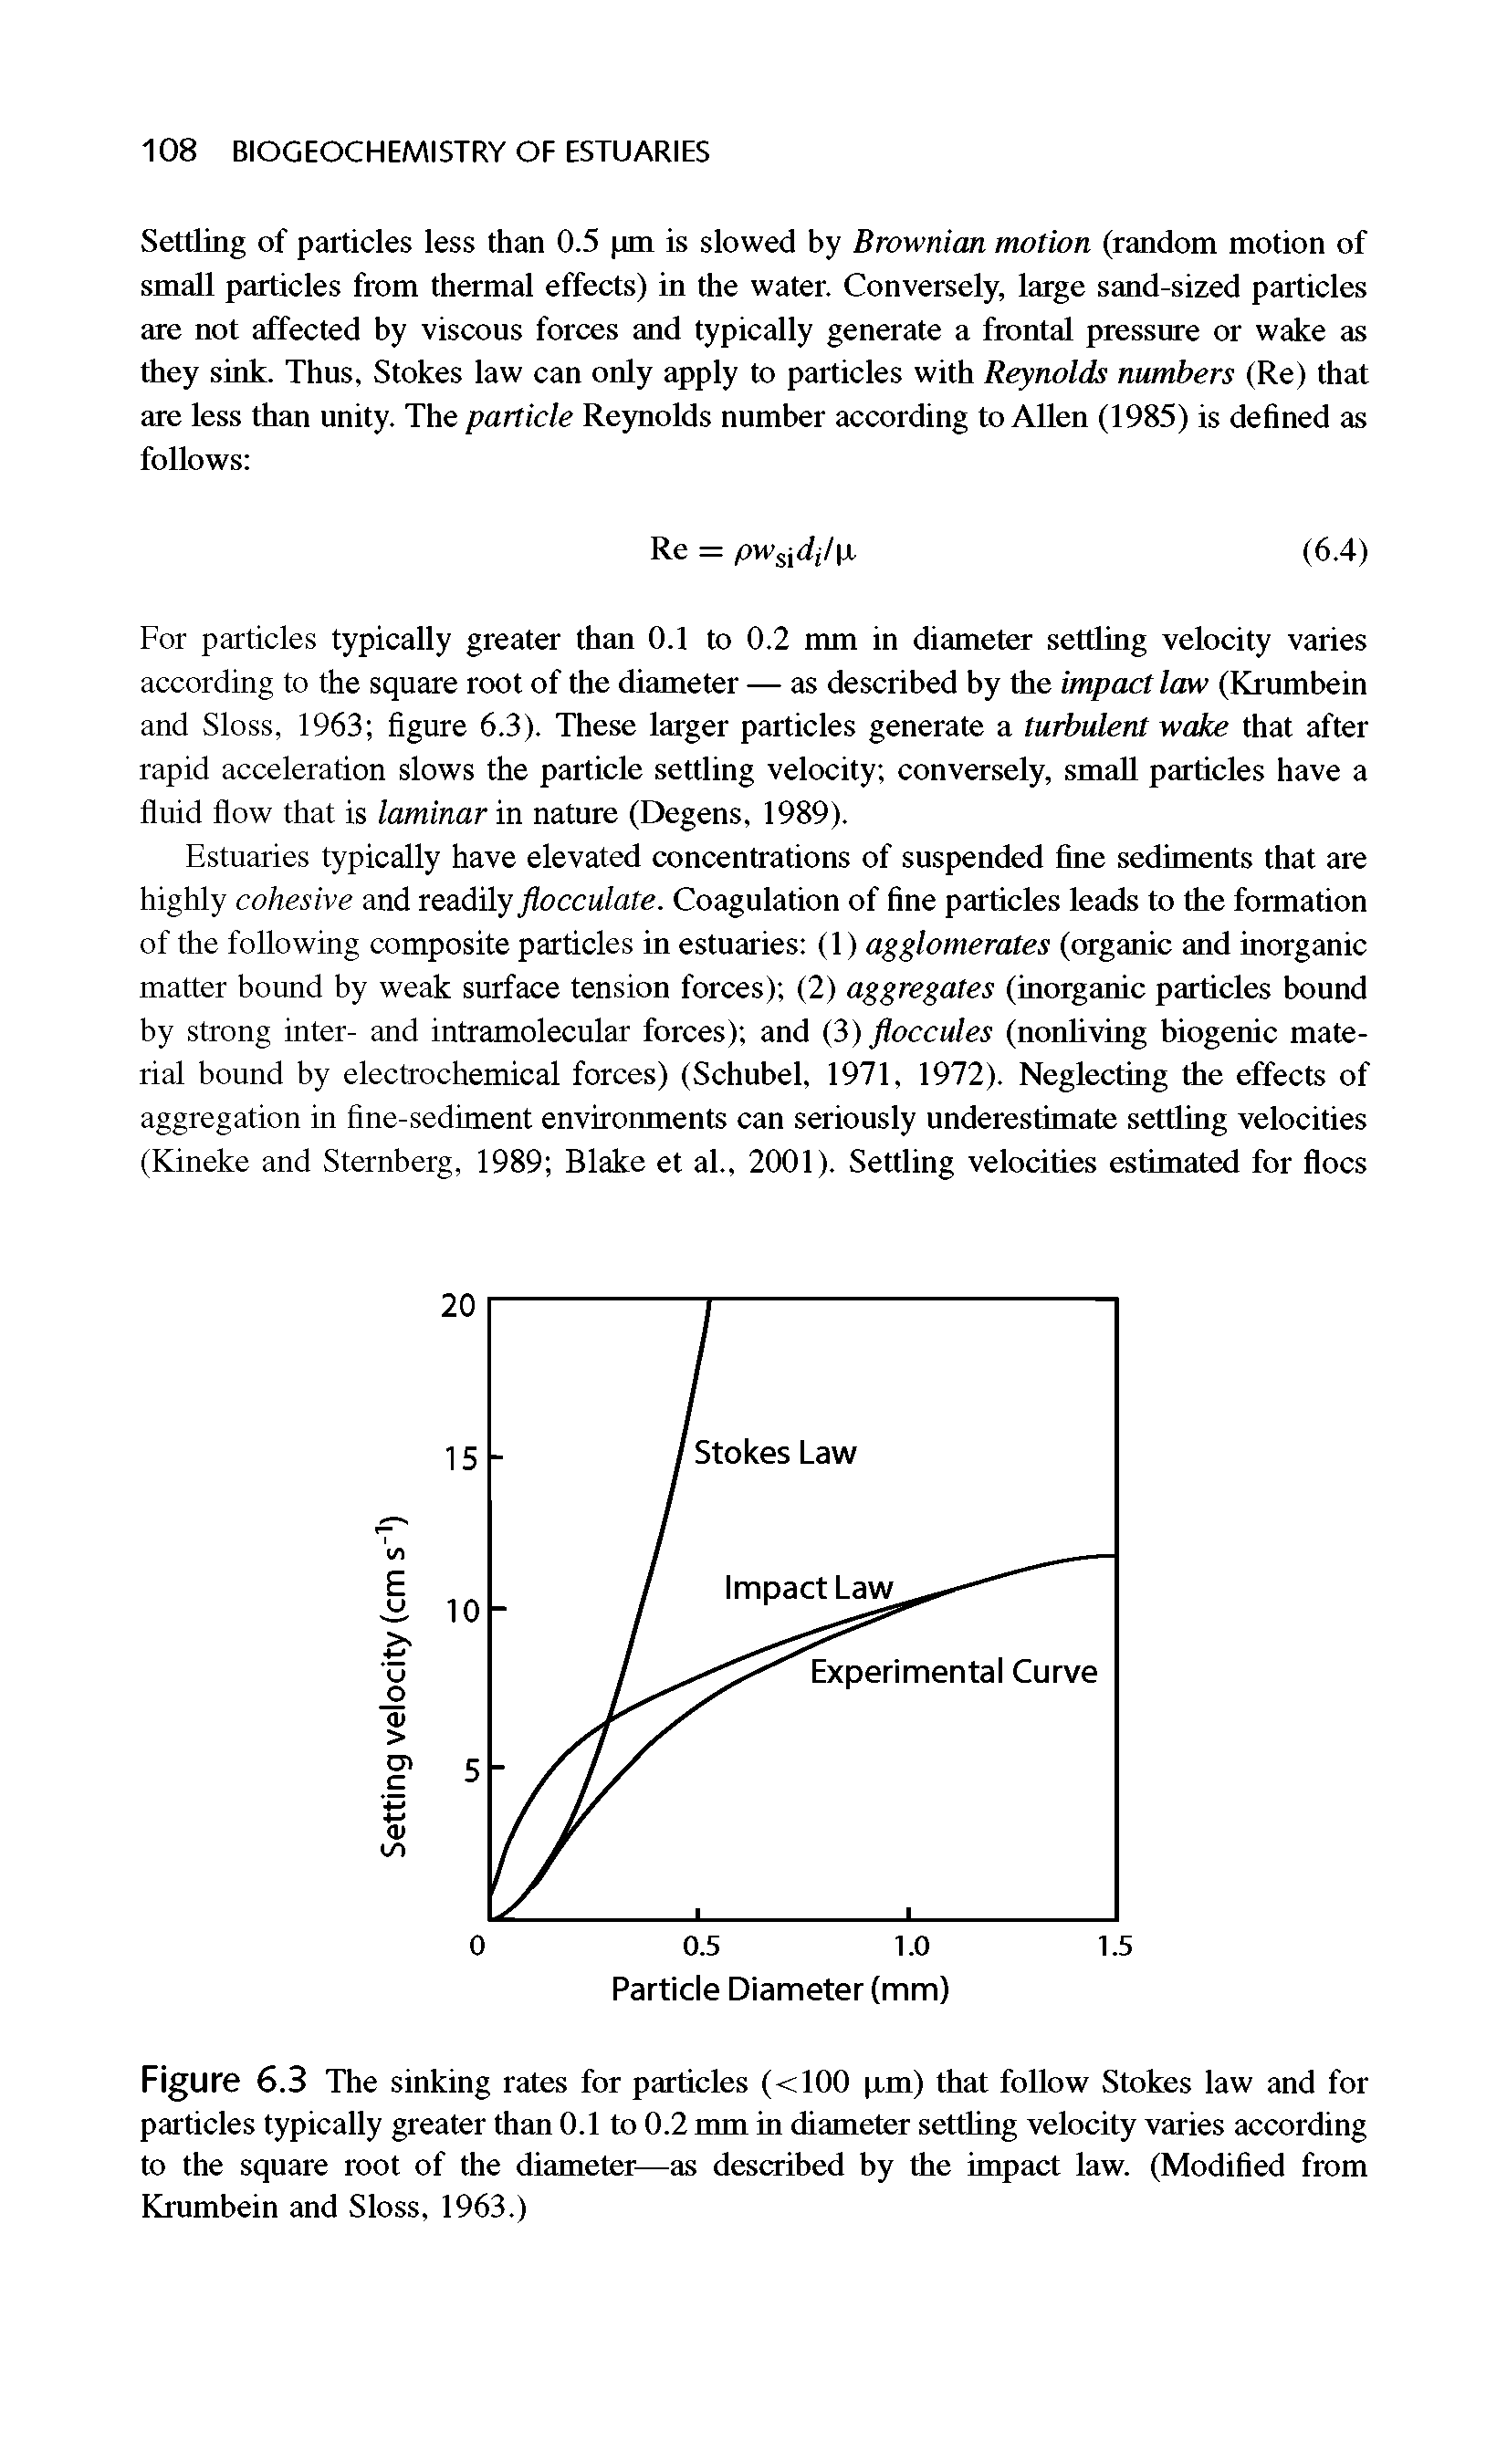 Figure 6.3 The sinking rates for particles (<100 pm) that follow Stokes law and for particles typically greater than 0.1 to 0.2 mm in diameter settling velocity varies according to the square root of the diameter—as described by the impact law. (Modified from Krumbein and Sloss, 1963.)...